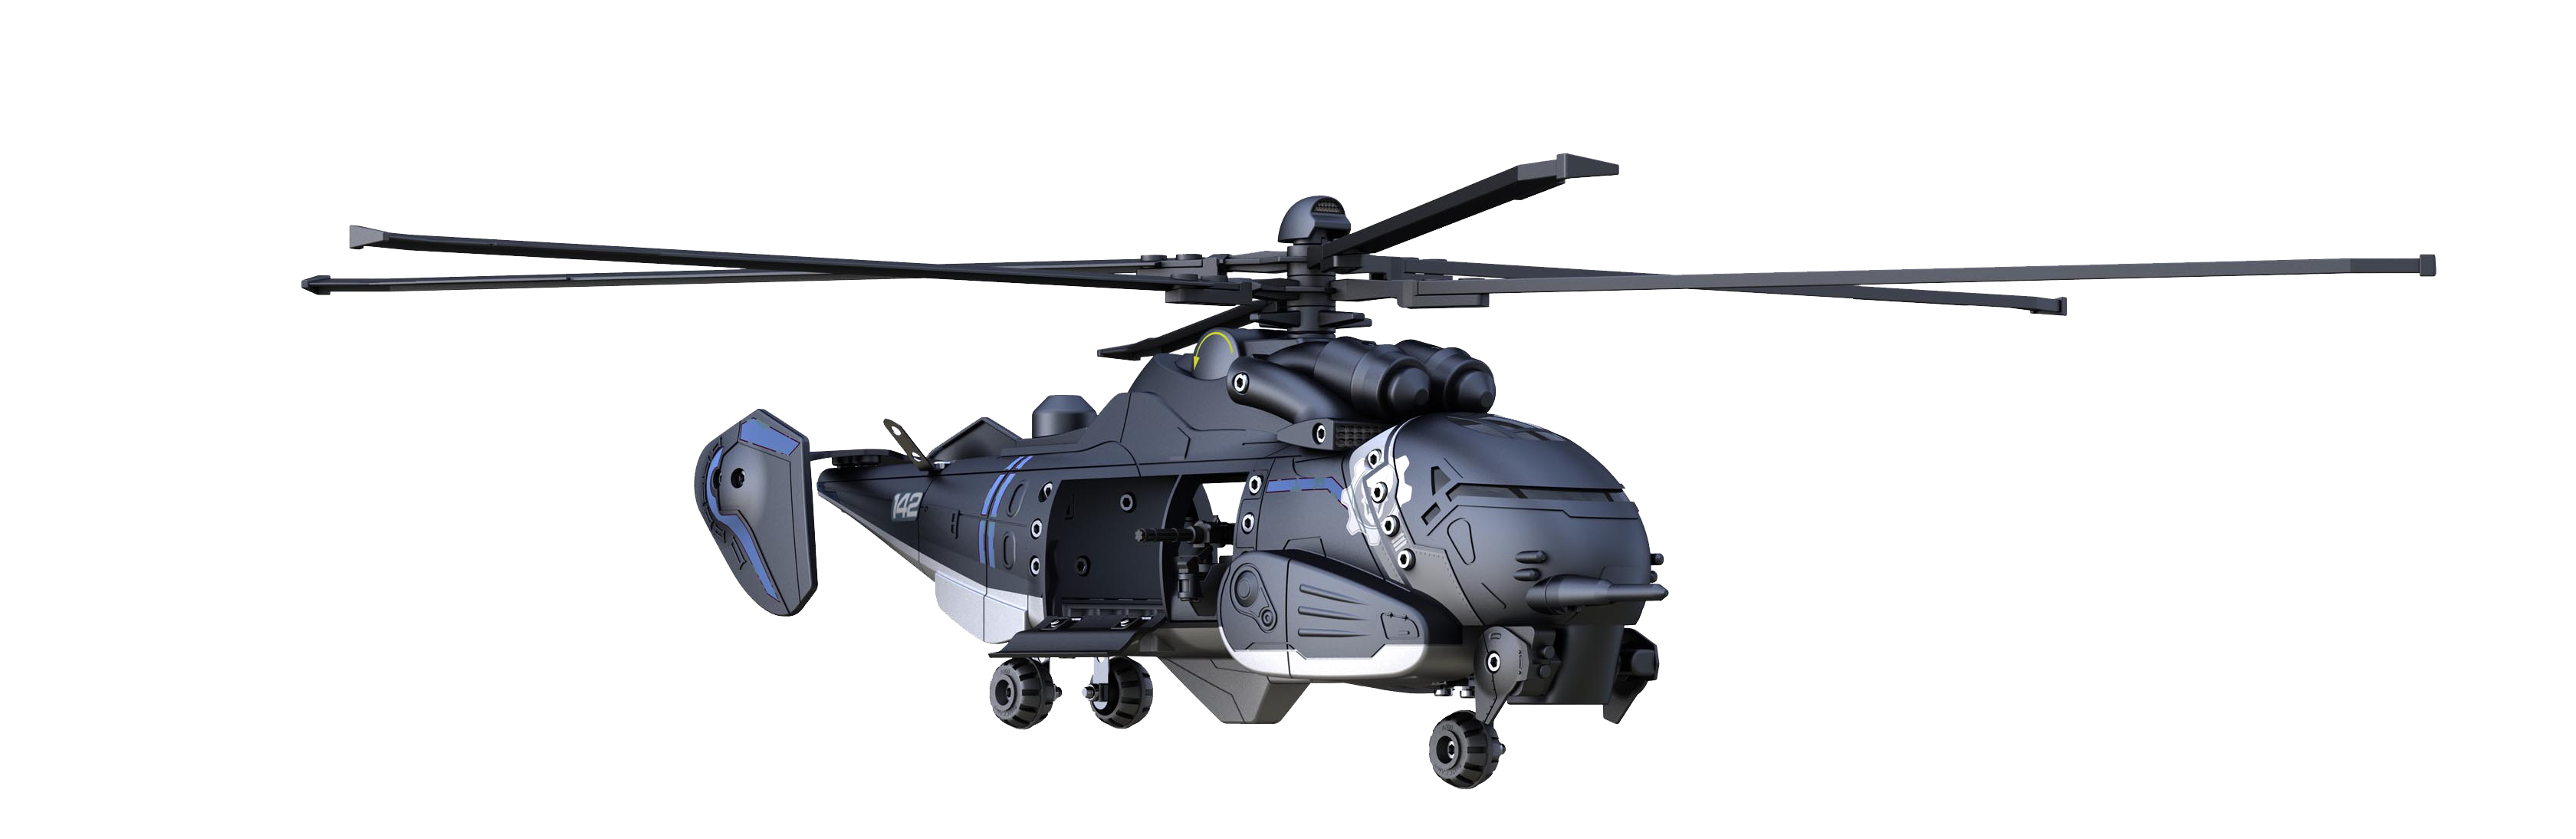 Army Helicopter PNG HD Image - Army Helicopter Png